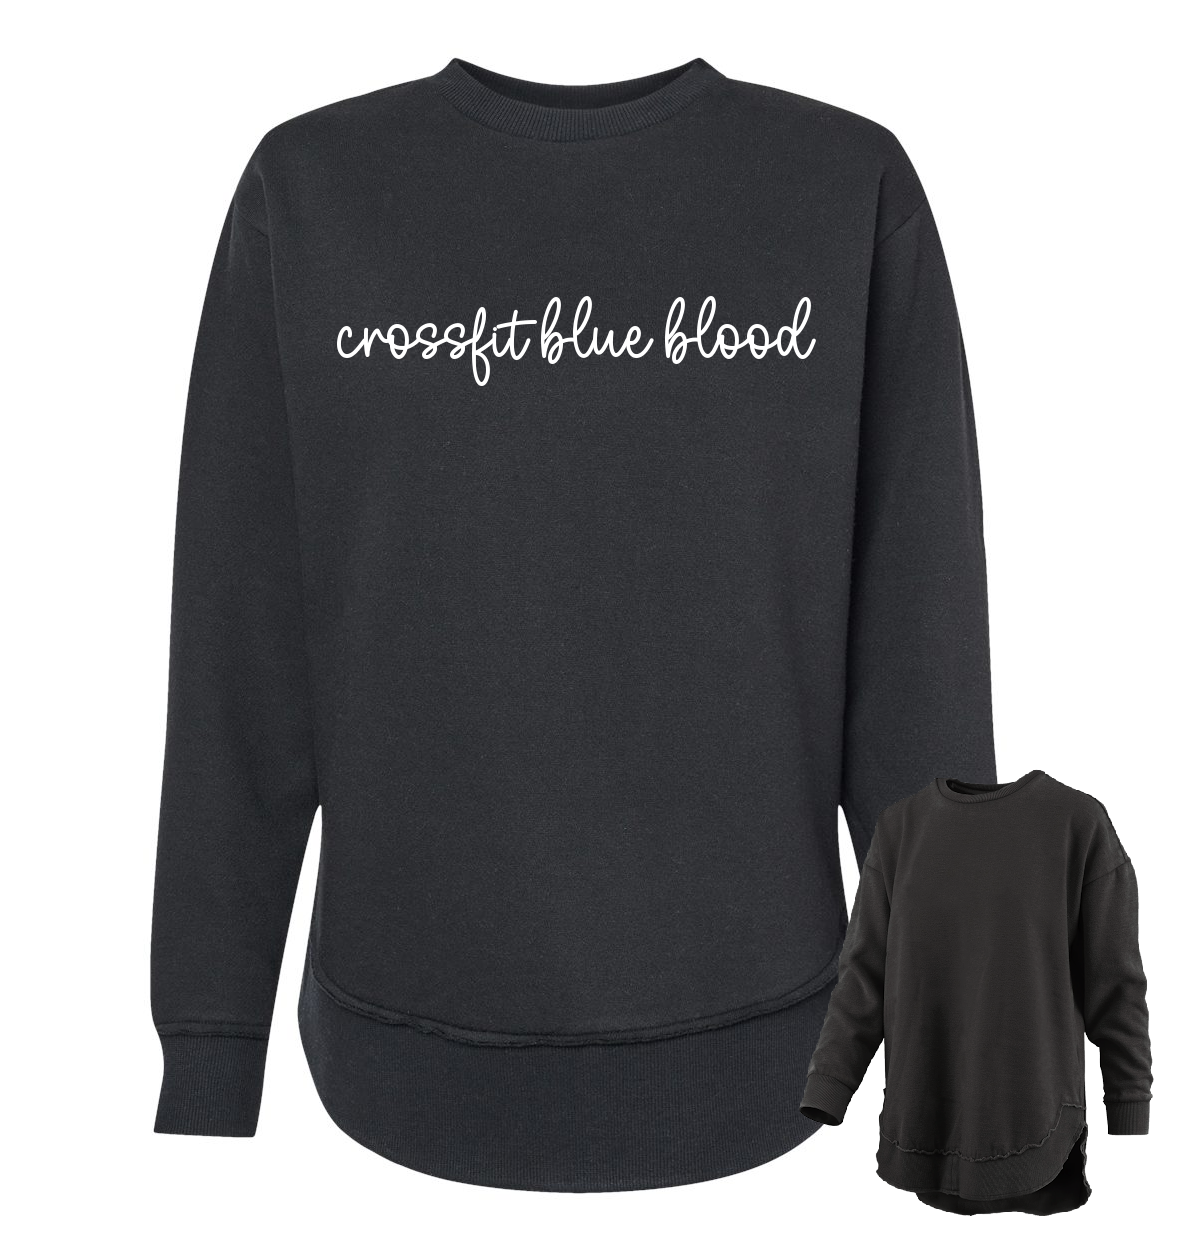 Crossfit Blue Blood Boutique High Low Quality Sweatshirt/ True to Size